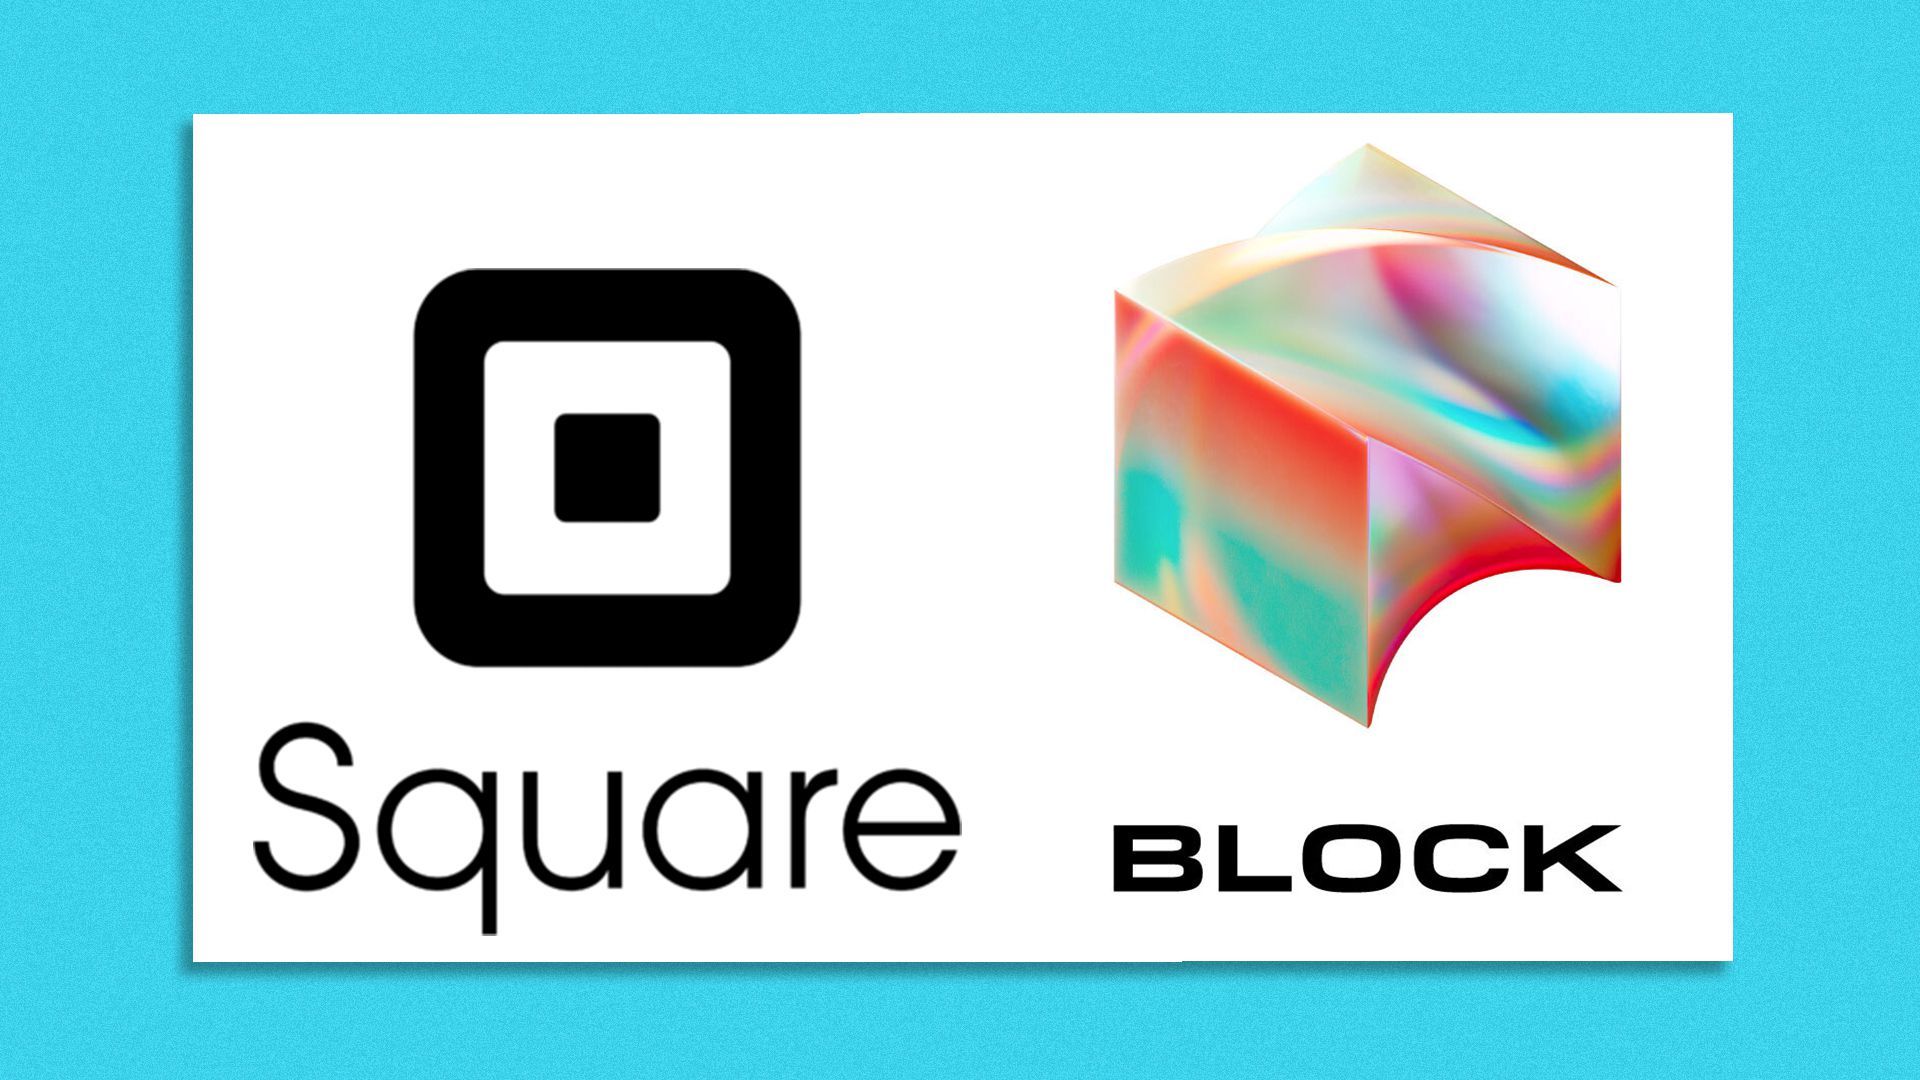 Image of the Square logo next to the Block logo.